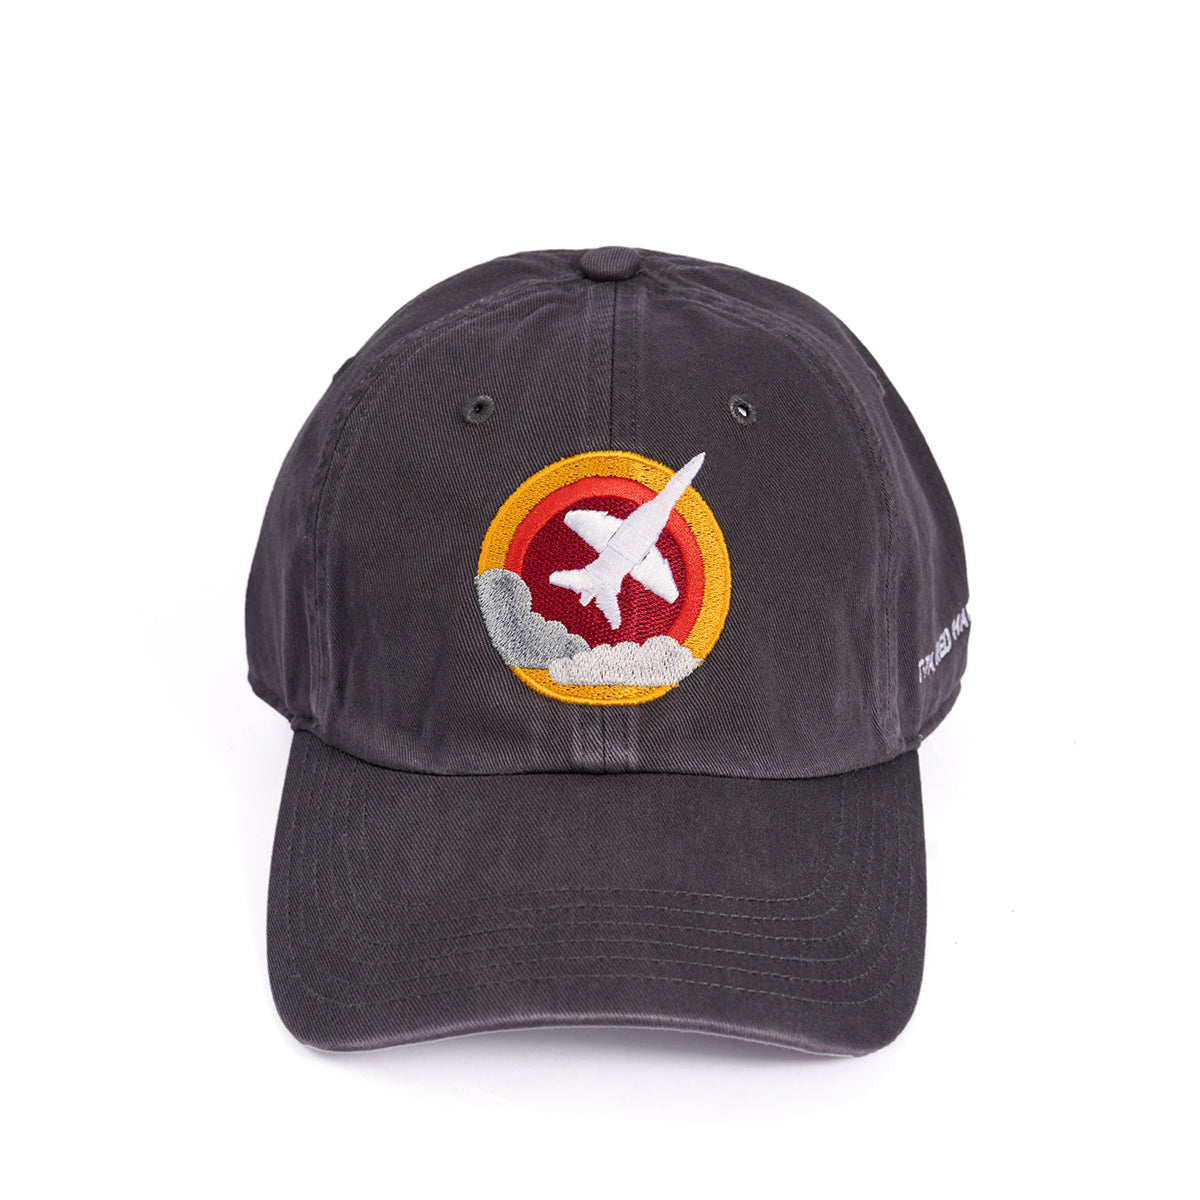 Skyward hat, featuring the iconic Boeing T-7A Red Hawk embroidered in a roundel design on the front.